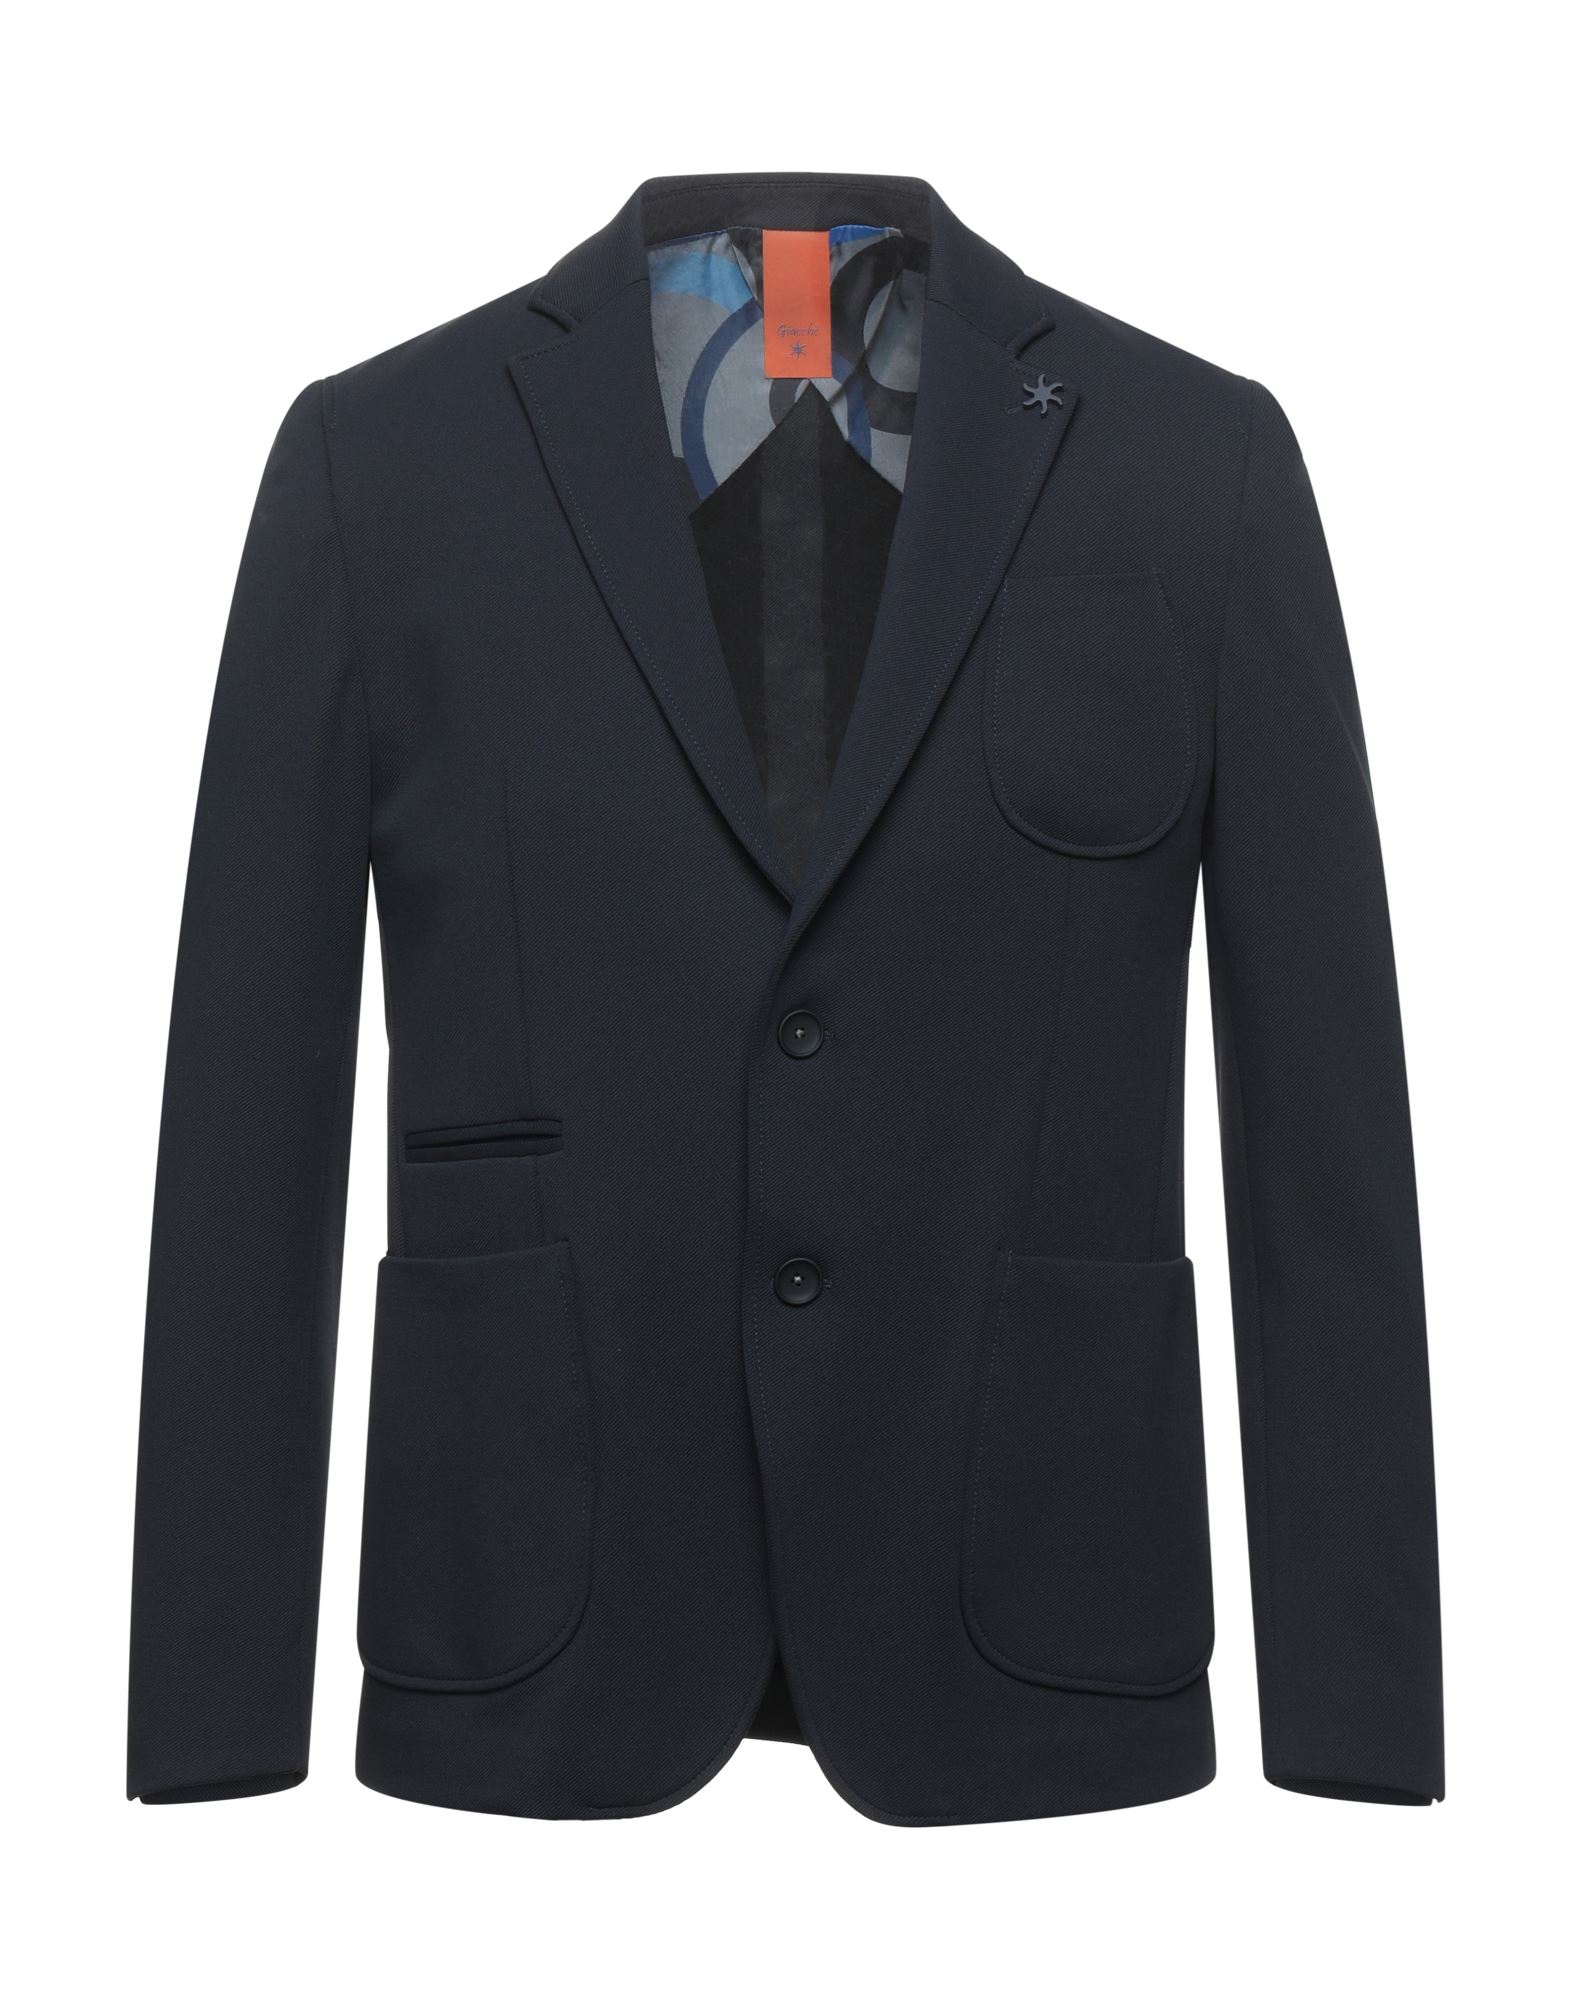 GIACCHE' Suit jackets